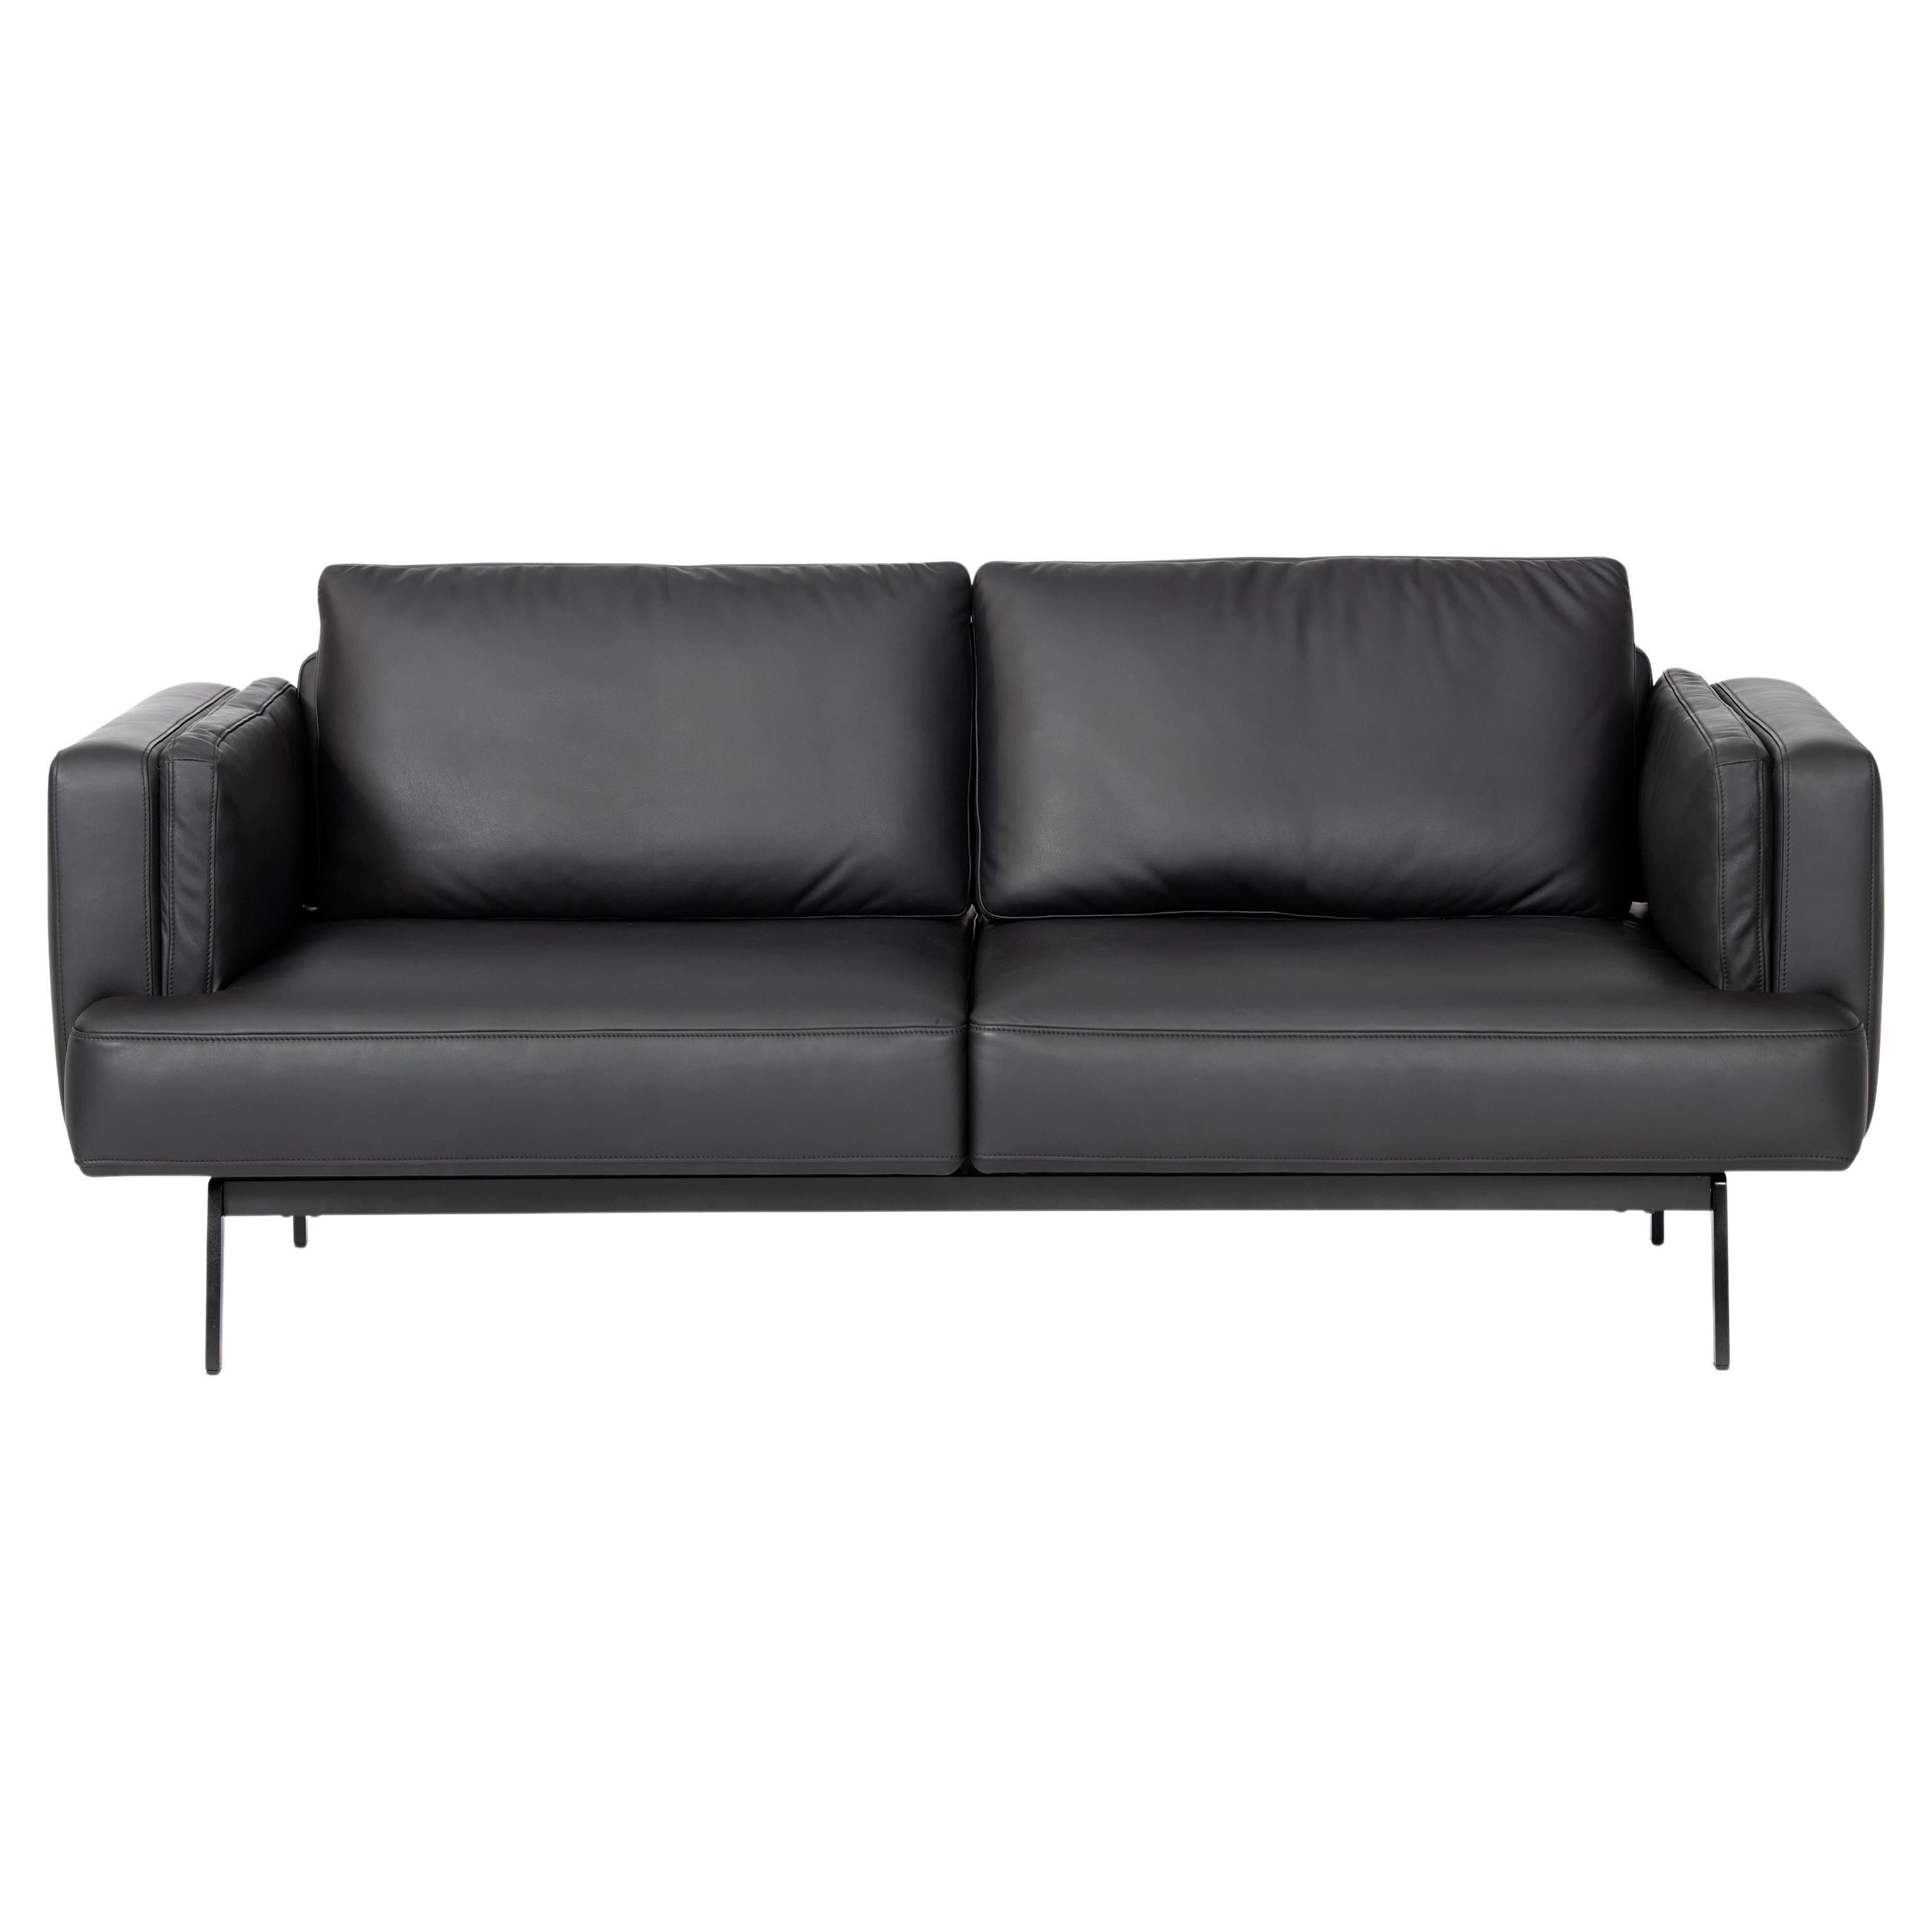 DeSede DS-747/02 Multifunctional Sofa in Black Leather Seat and Back Upholstery For Sale